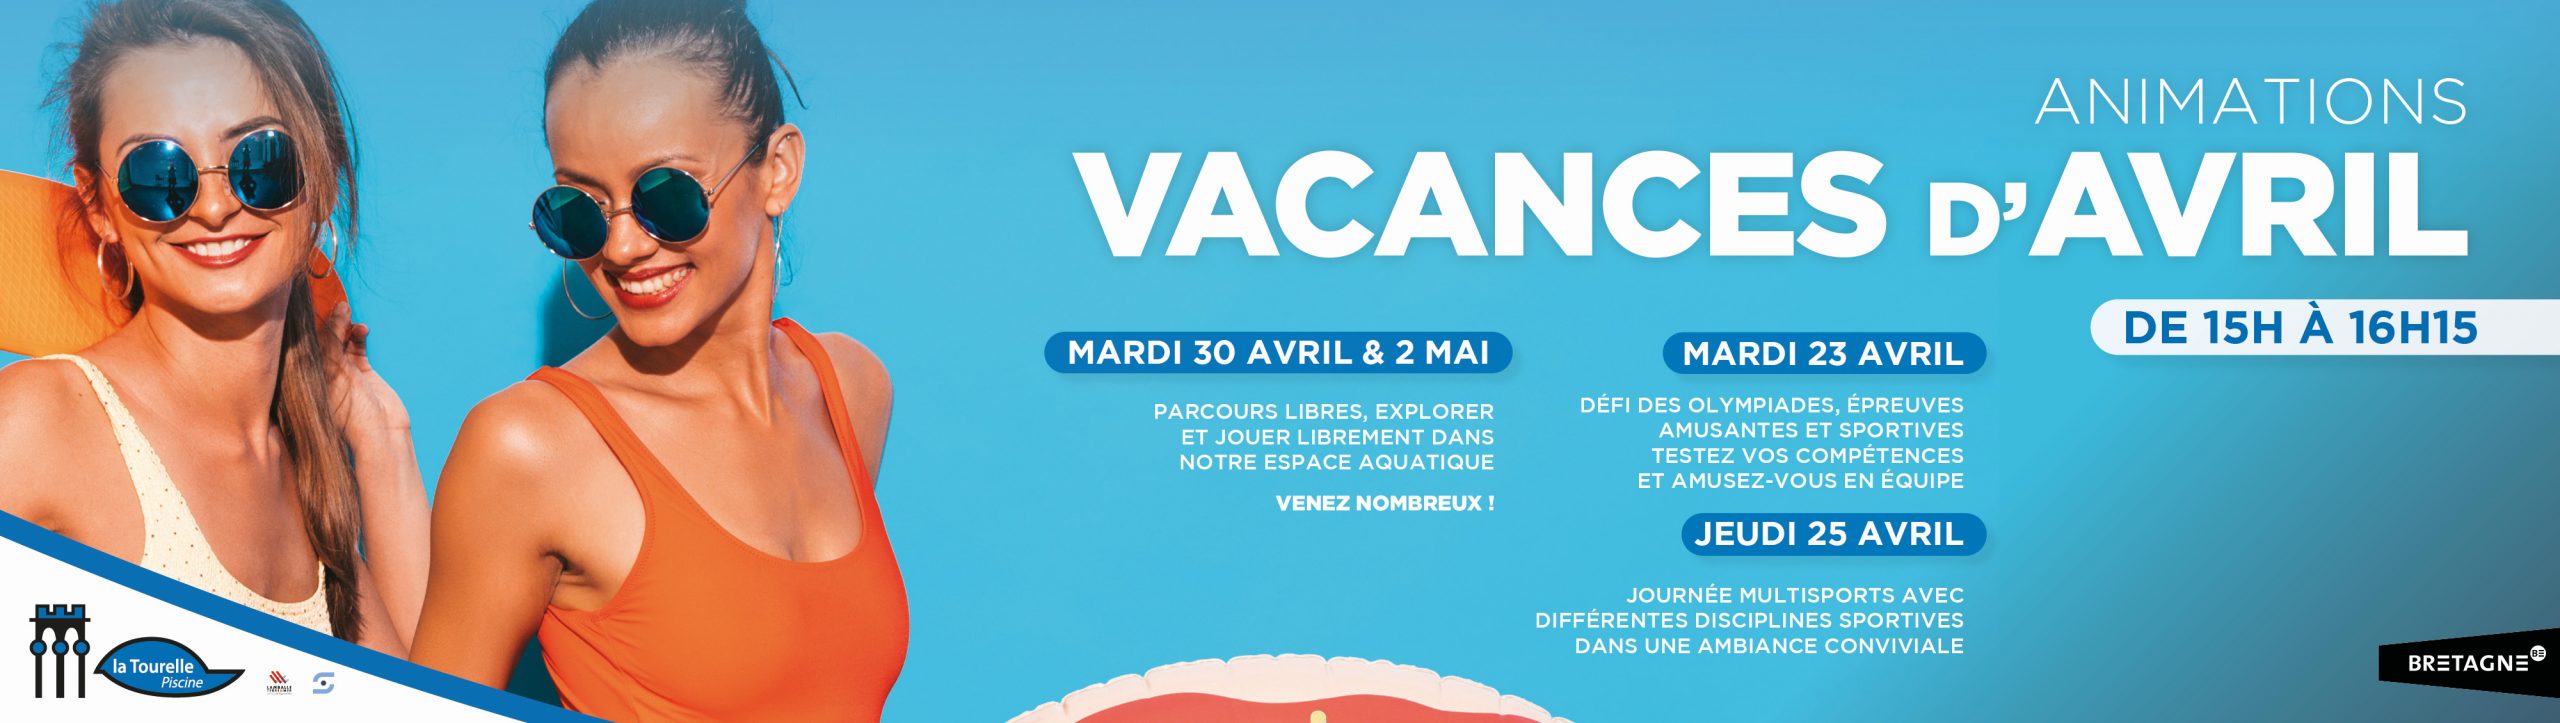 ANIMATIONS VACANCES D'AVRIL